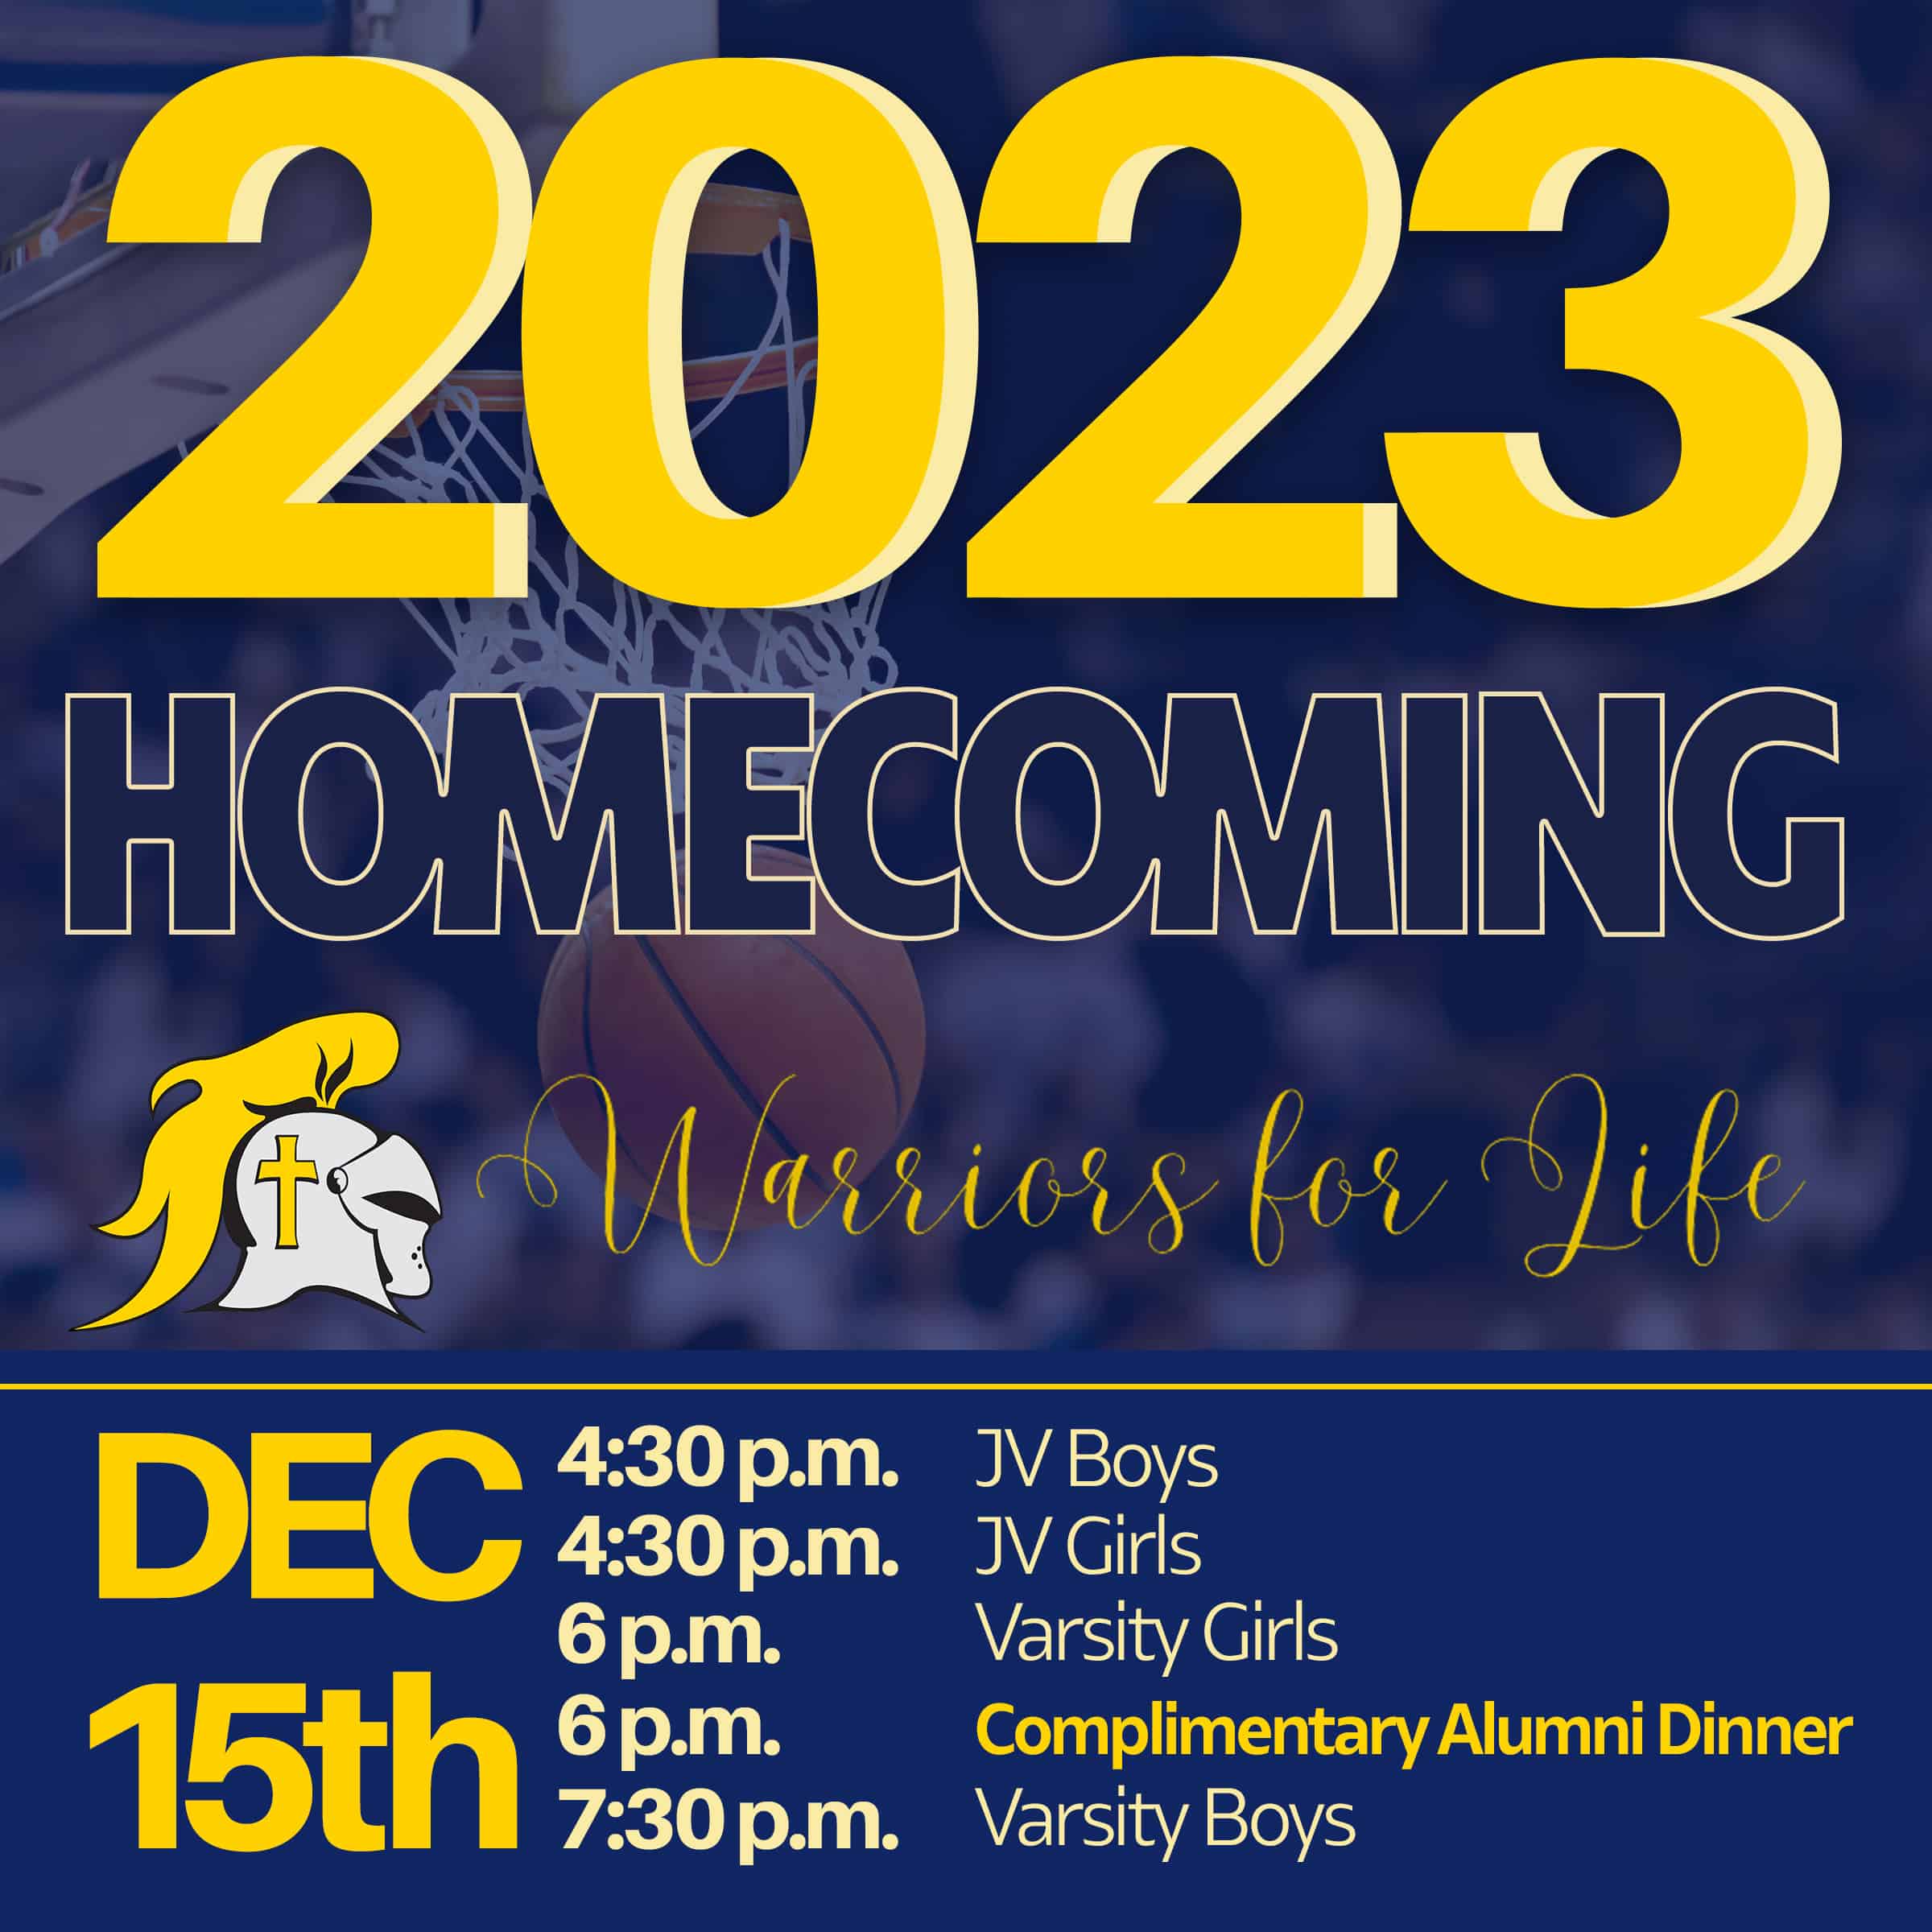 Christian Academy School System | Christian Academy of Indiana | Athletics | 2023 Homecoming | December 15